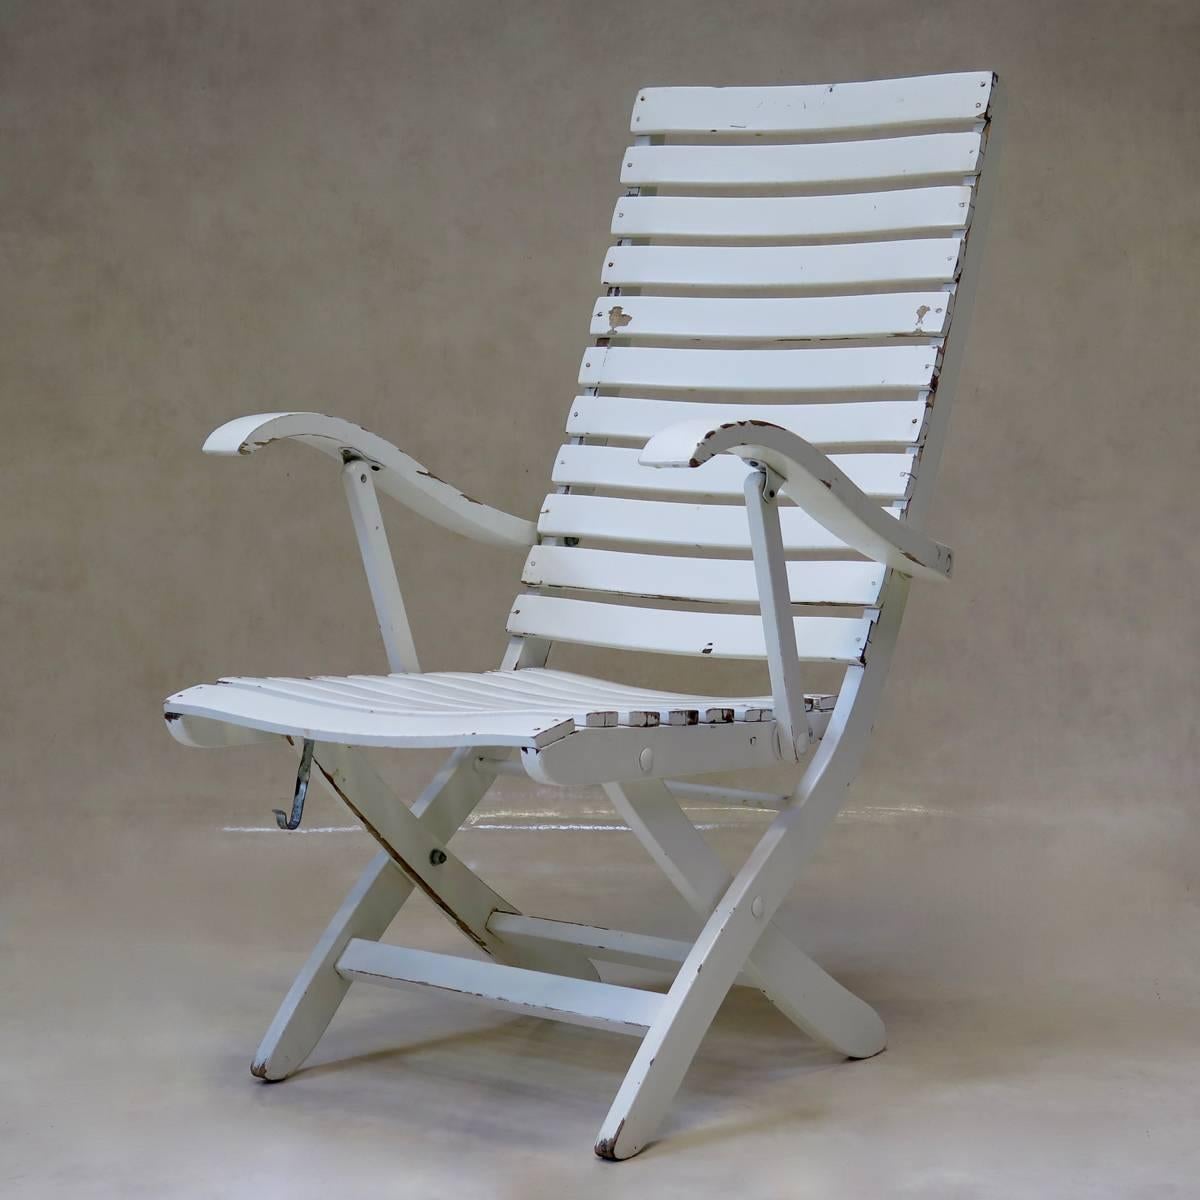 Elegant and practical set of Classic-design slatted deck chairs with armrests. Two positions -- one more upright and the other more reclined.